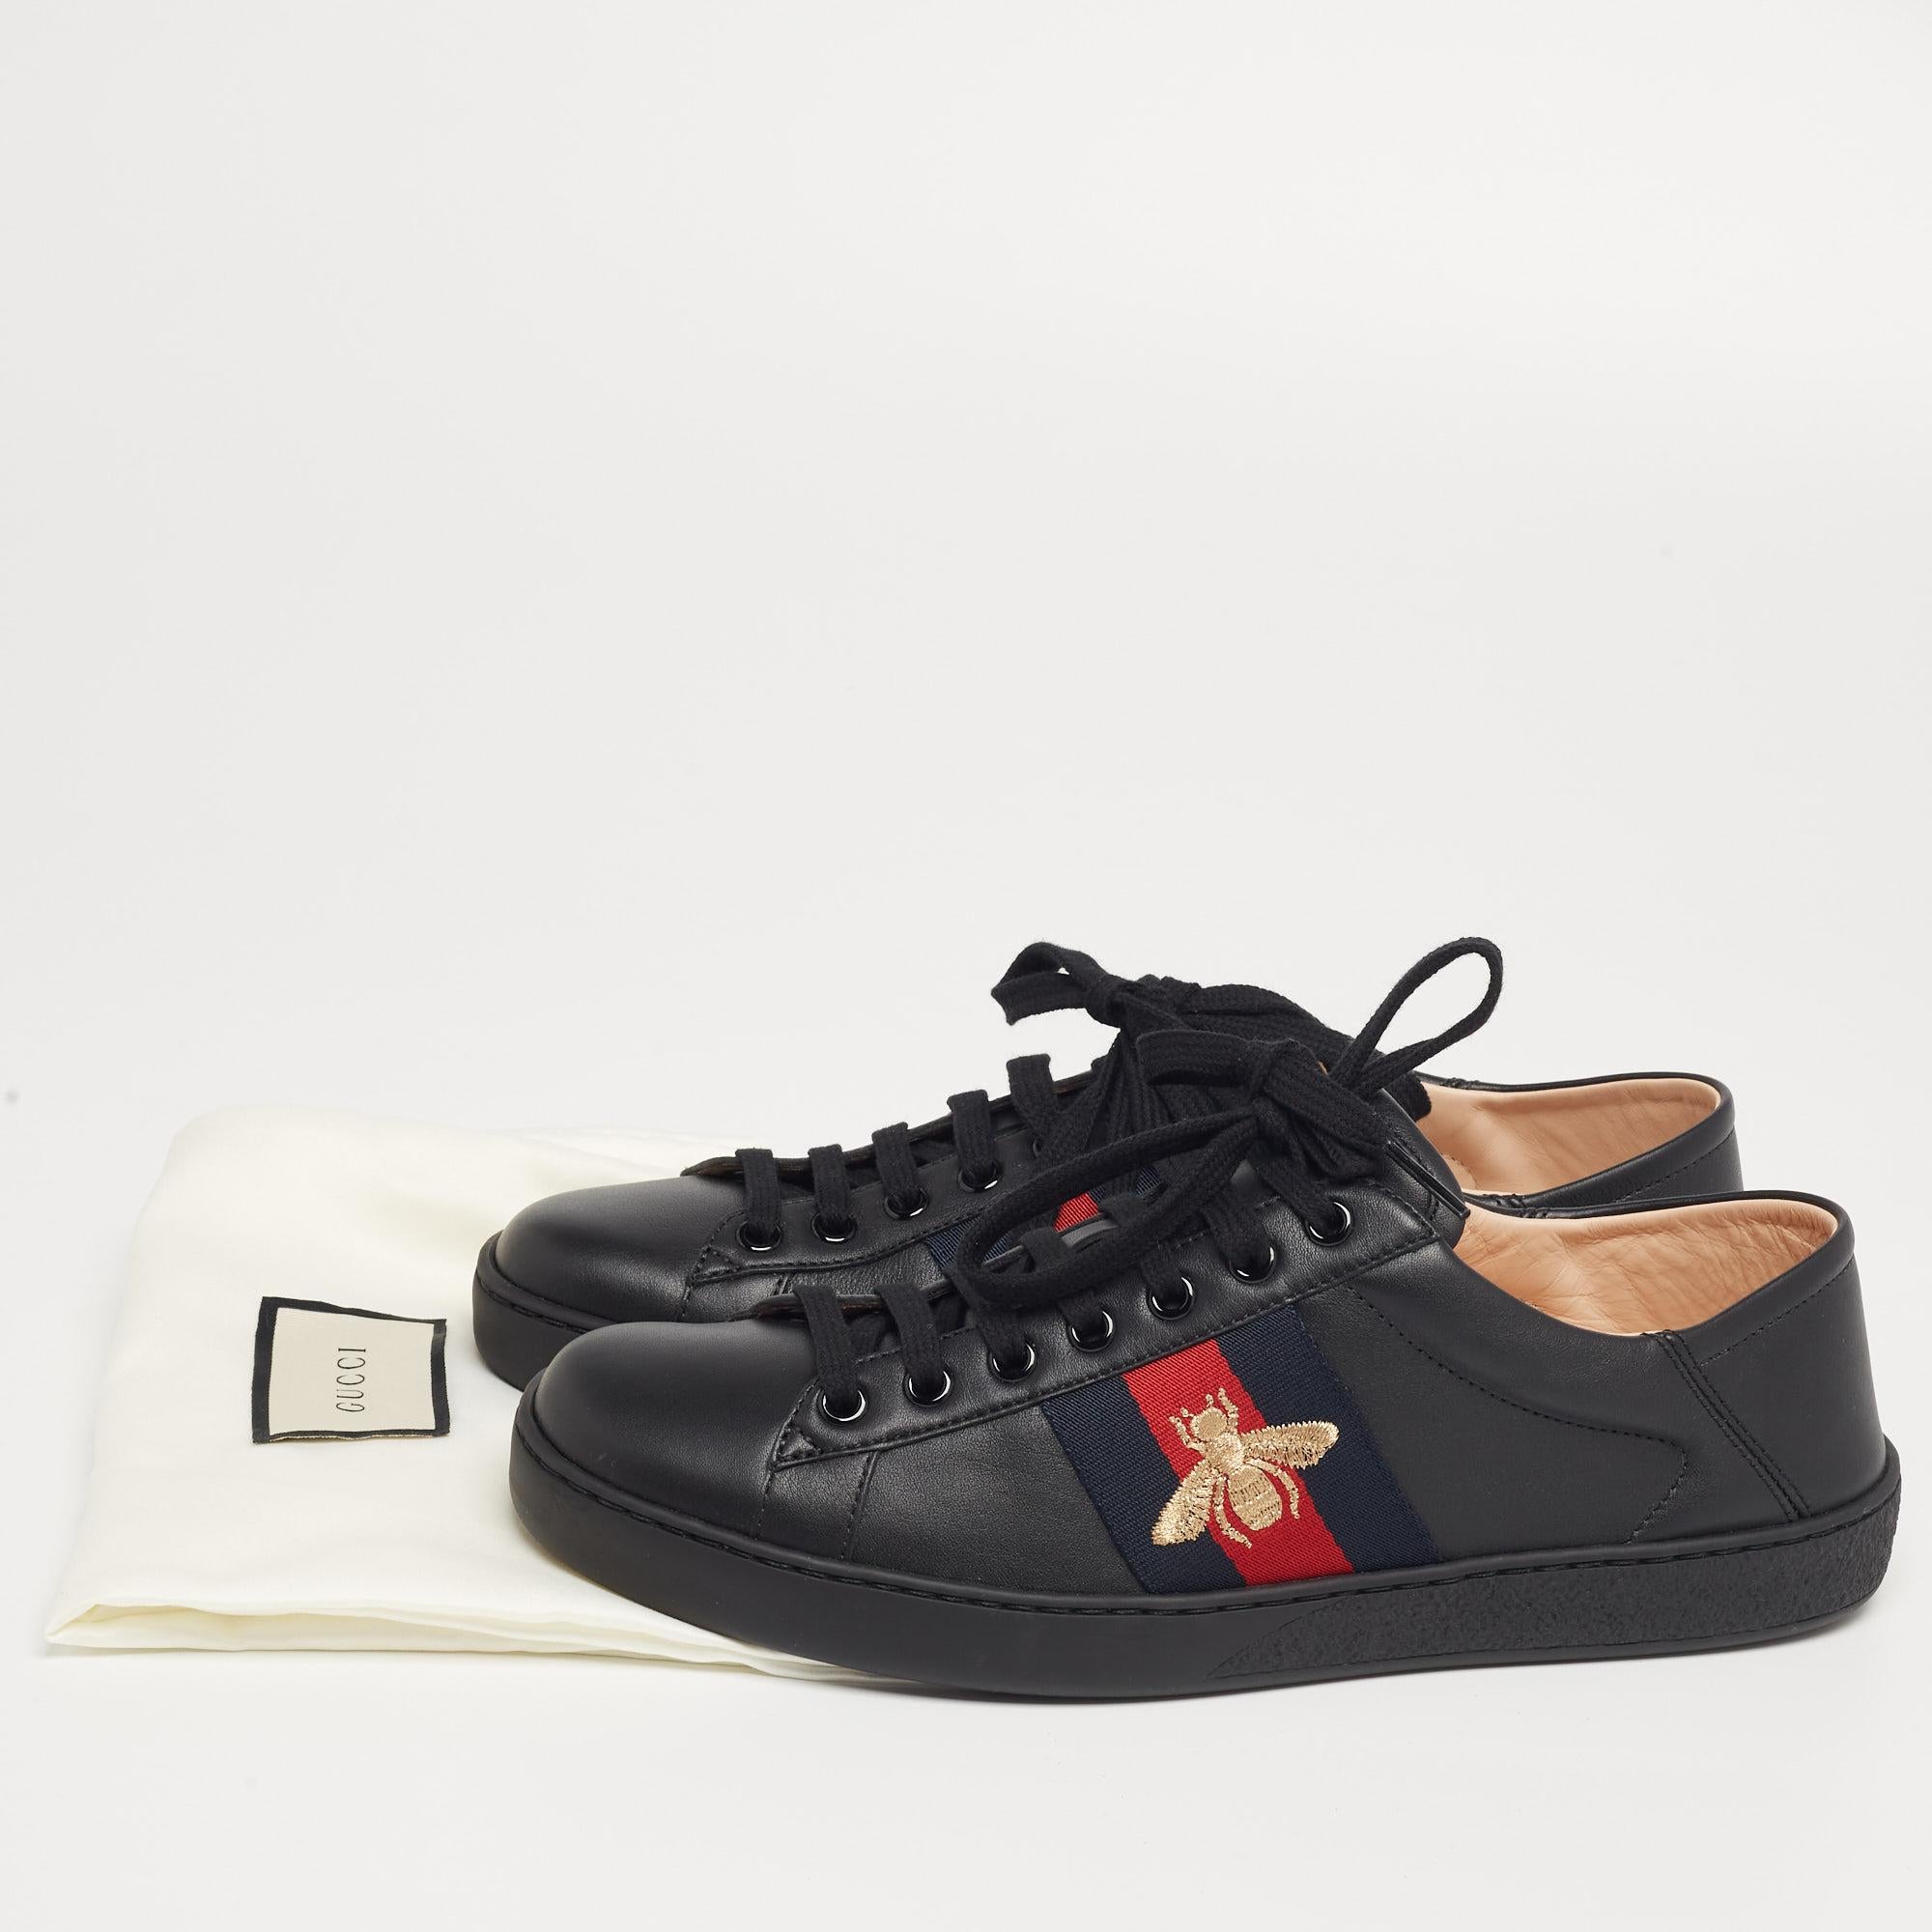 Gucci Black Leather Embroidered Bee Web Ace Low-Top Sneakers Size 40 2